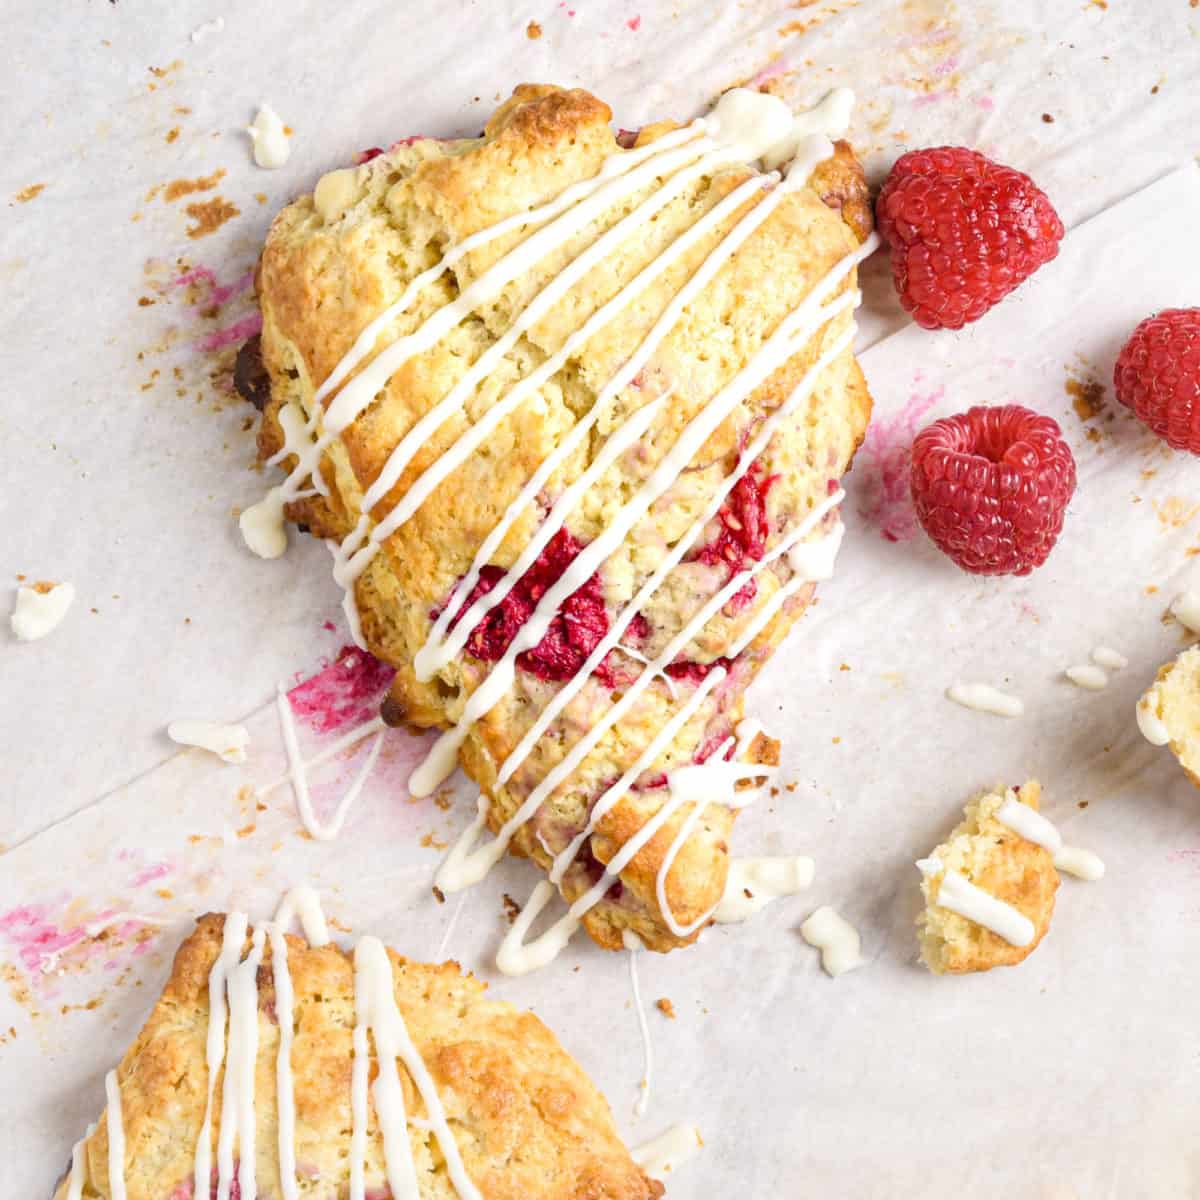 A scone with white chocolate drizzled on top of it.